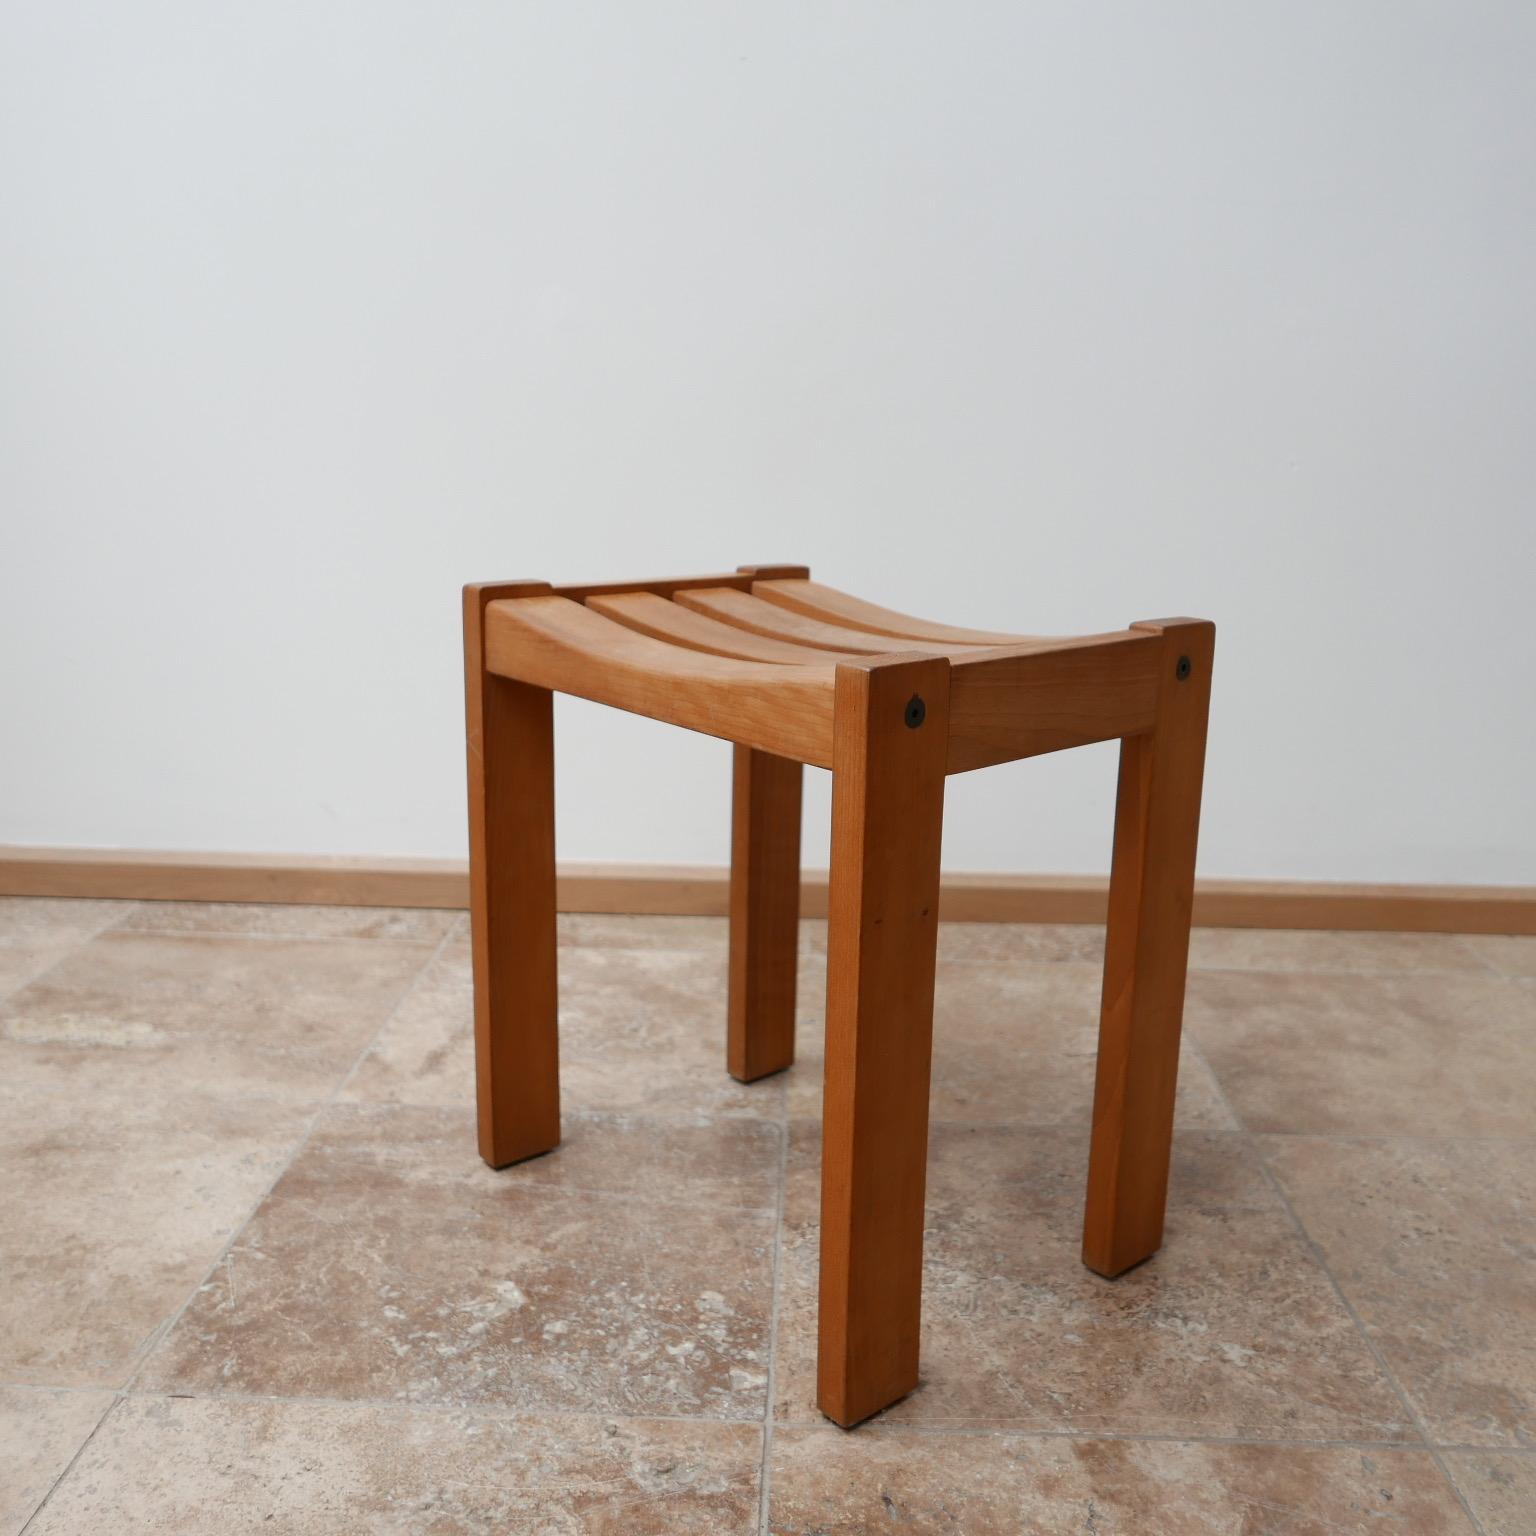 Midcentury French Blonde Oak Stools in the Manner of Guillerme et Chambron '11' For Sale 7